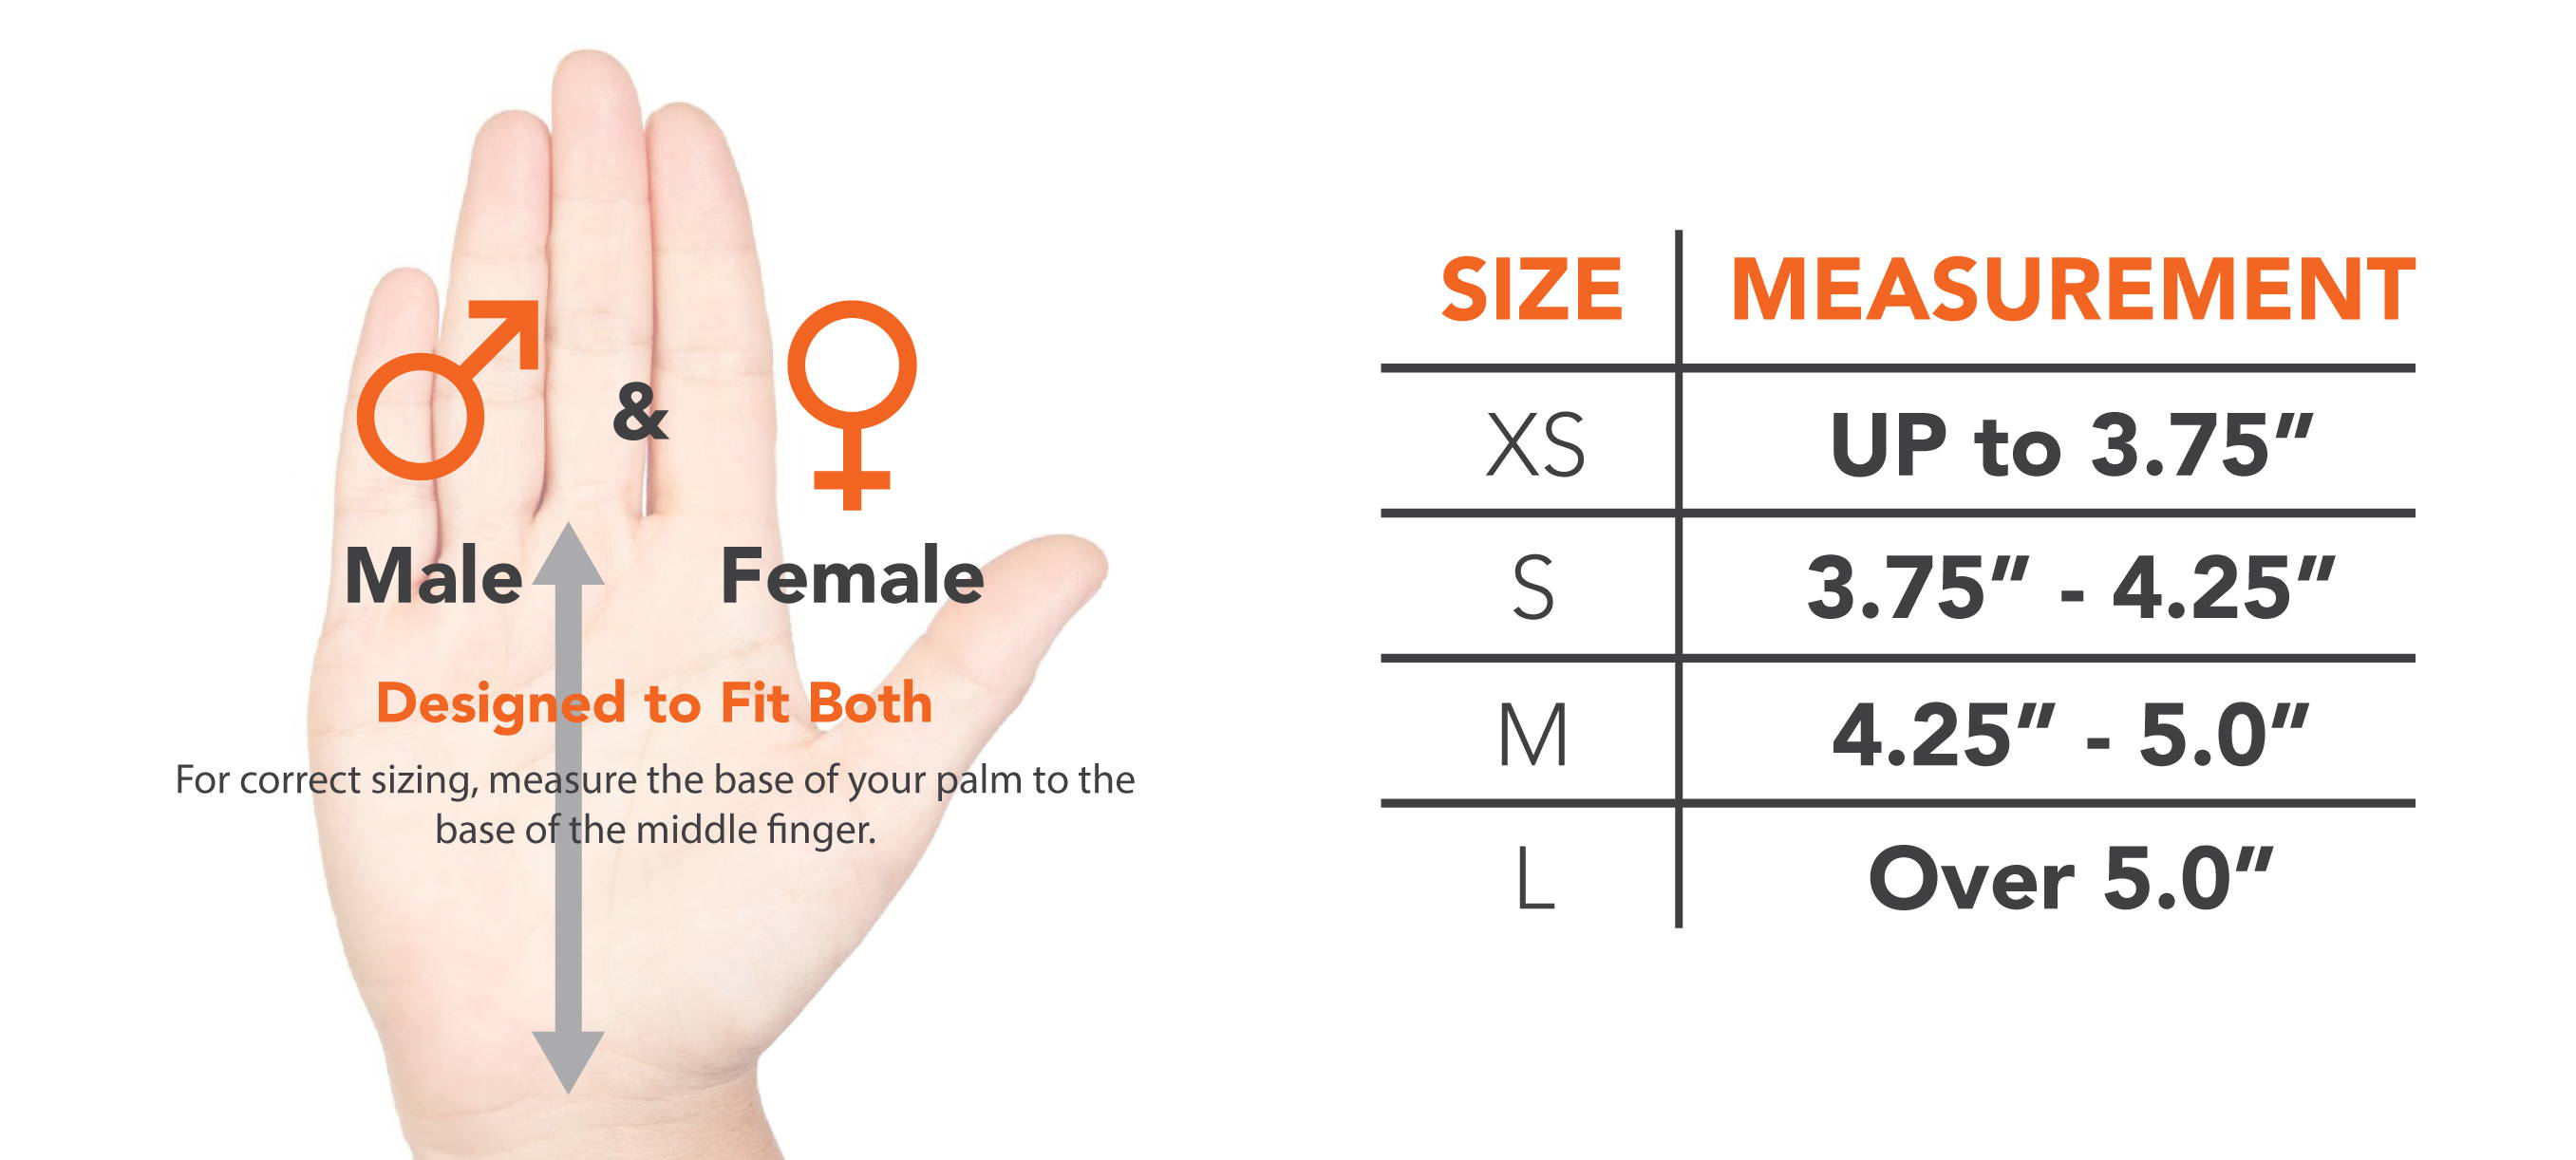 sizing chart for 3 hole leather cross training glove